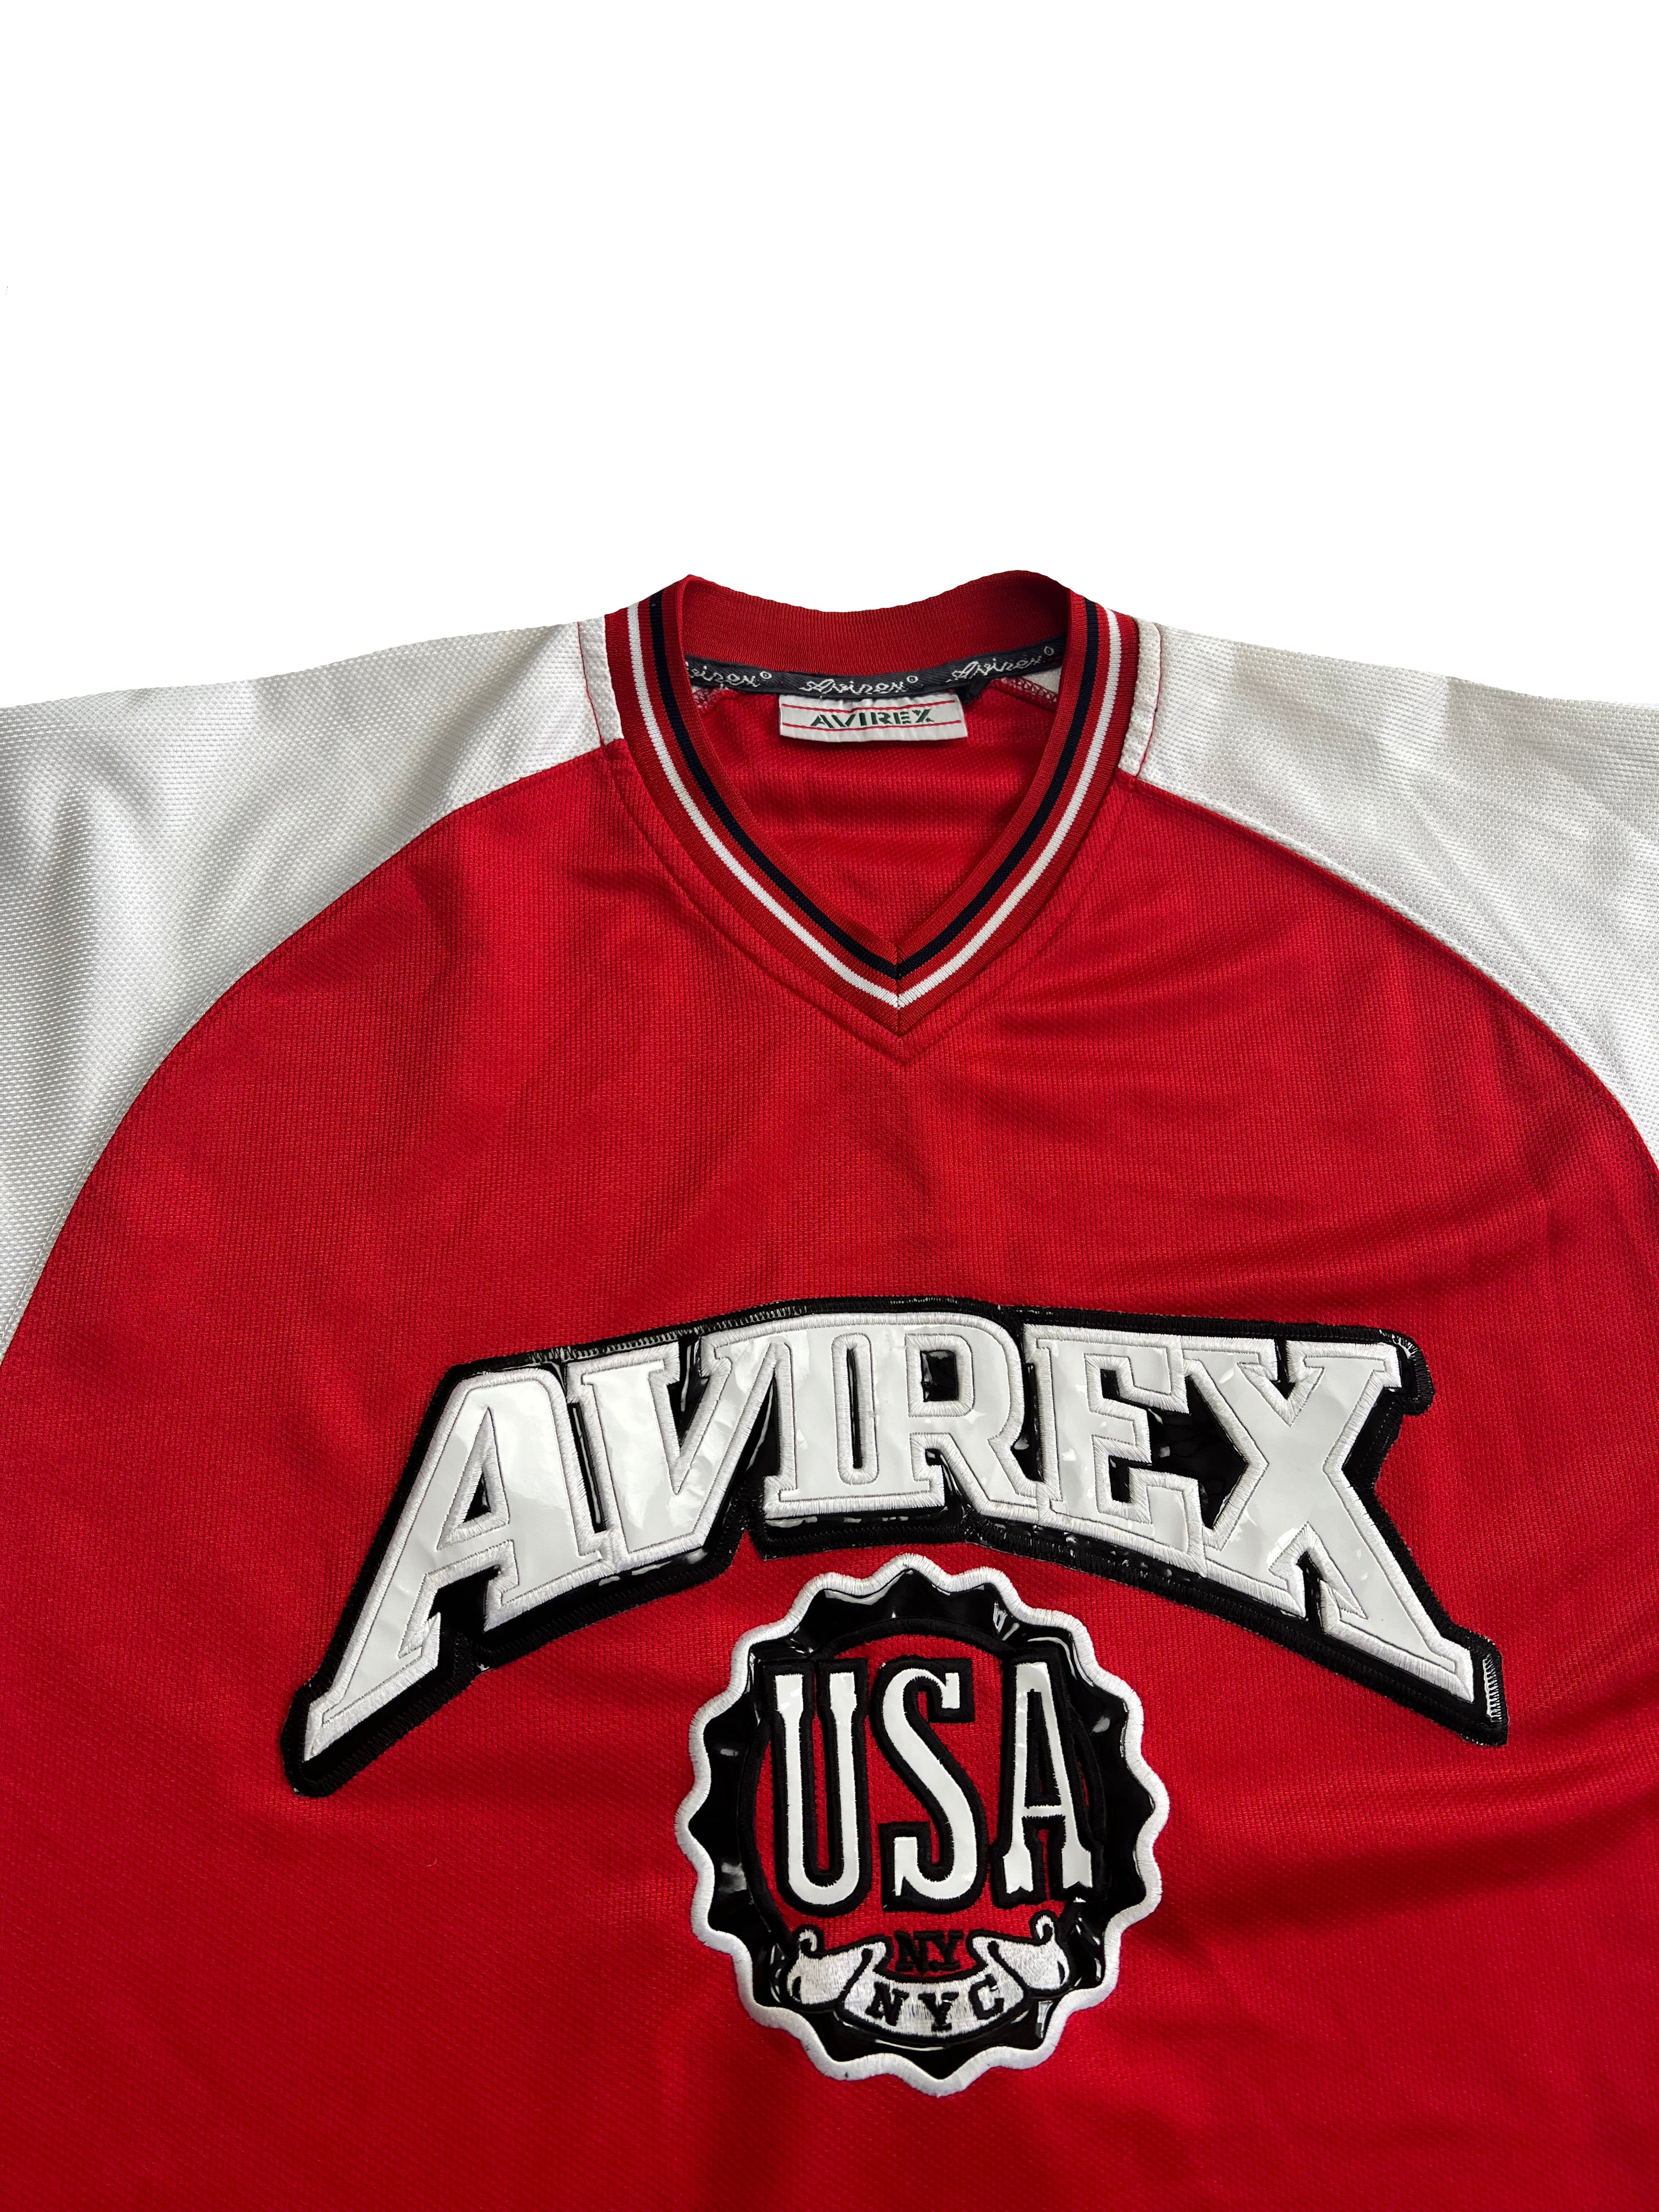 Avirex Red Spell Out Jersey 90's